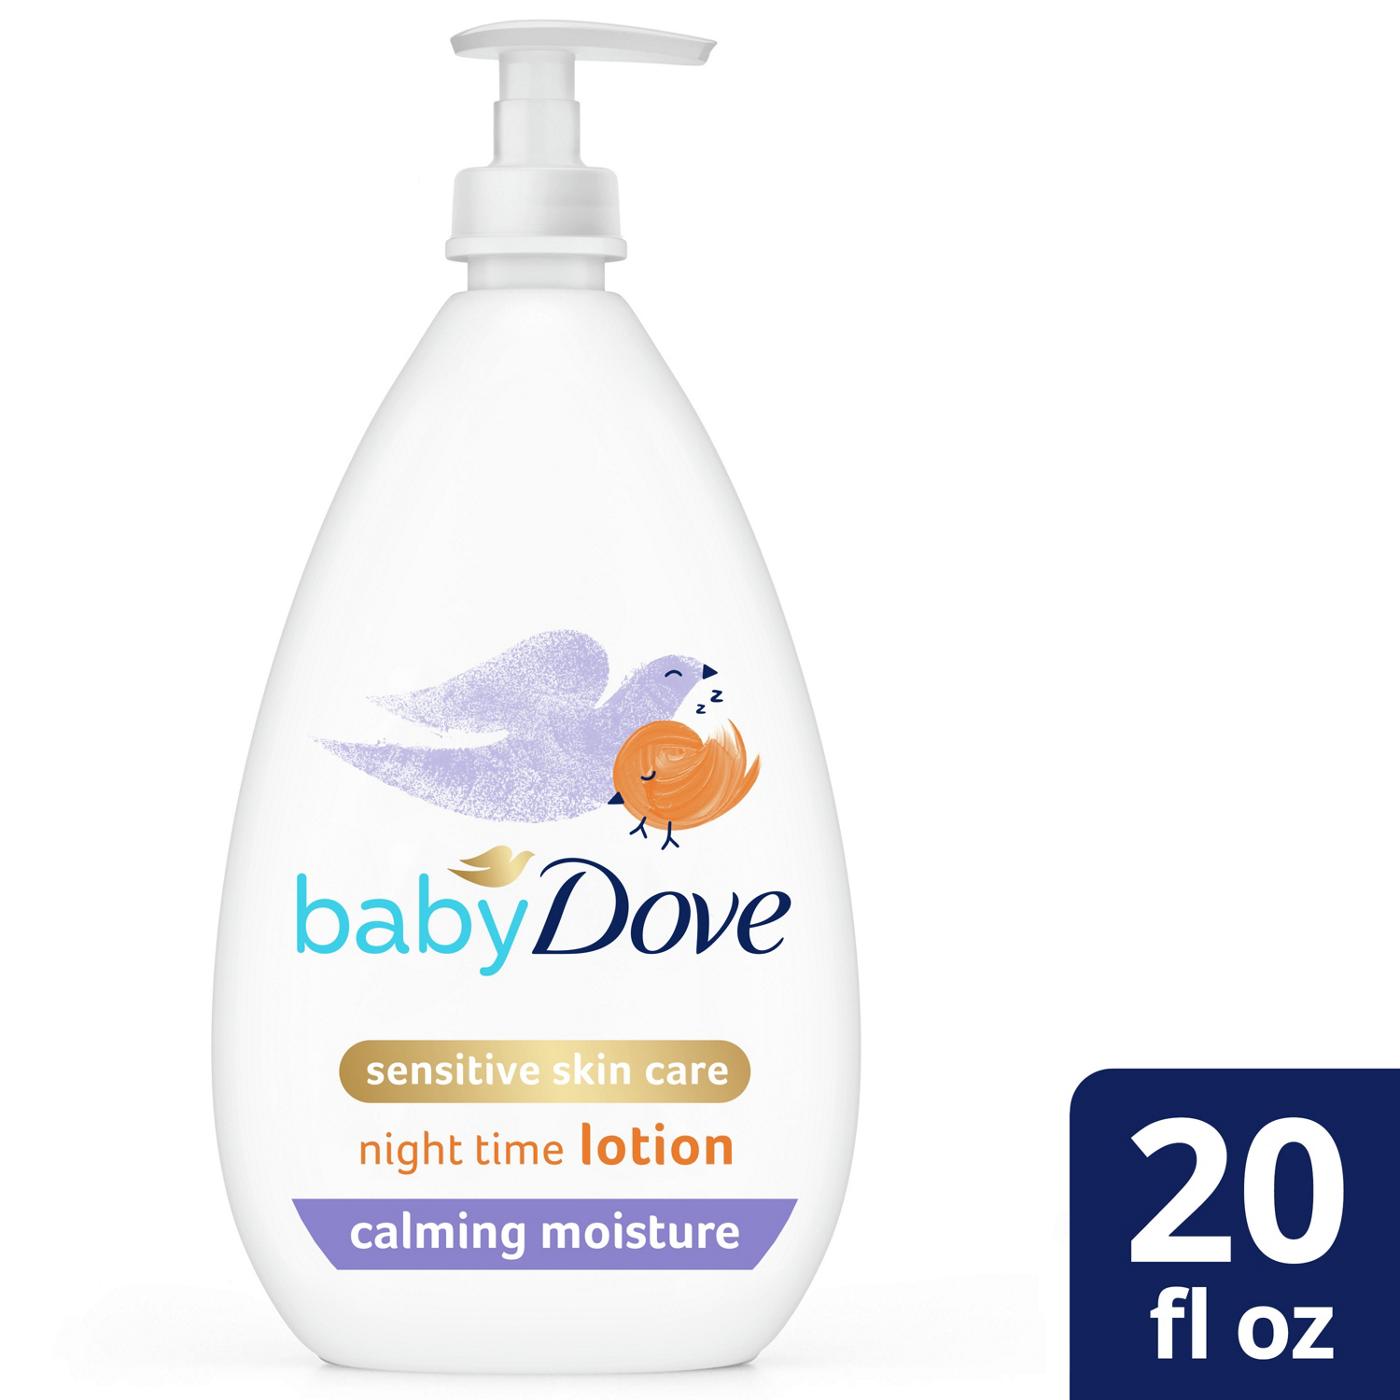 Baby Dove Calming Moisture Night Time Lotion; image 2 of 7